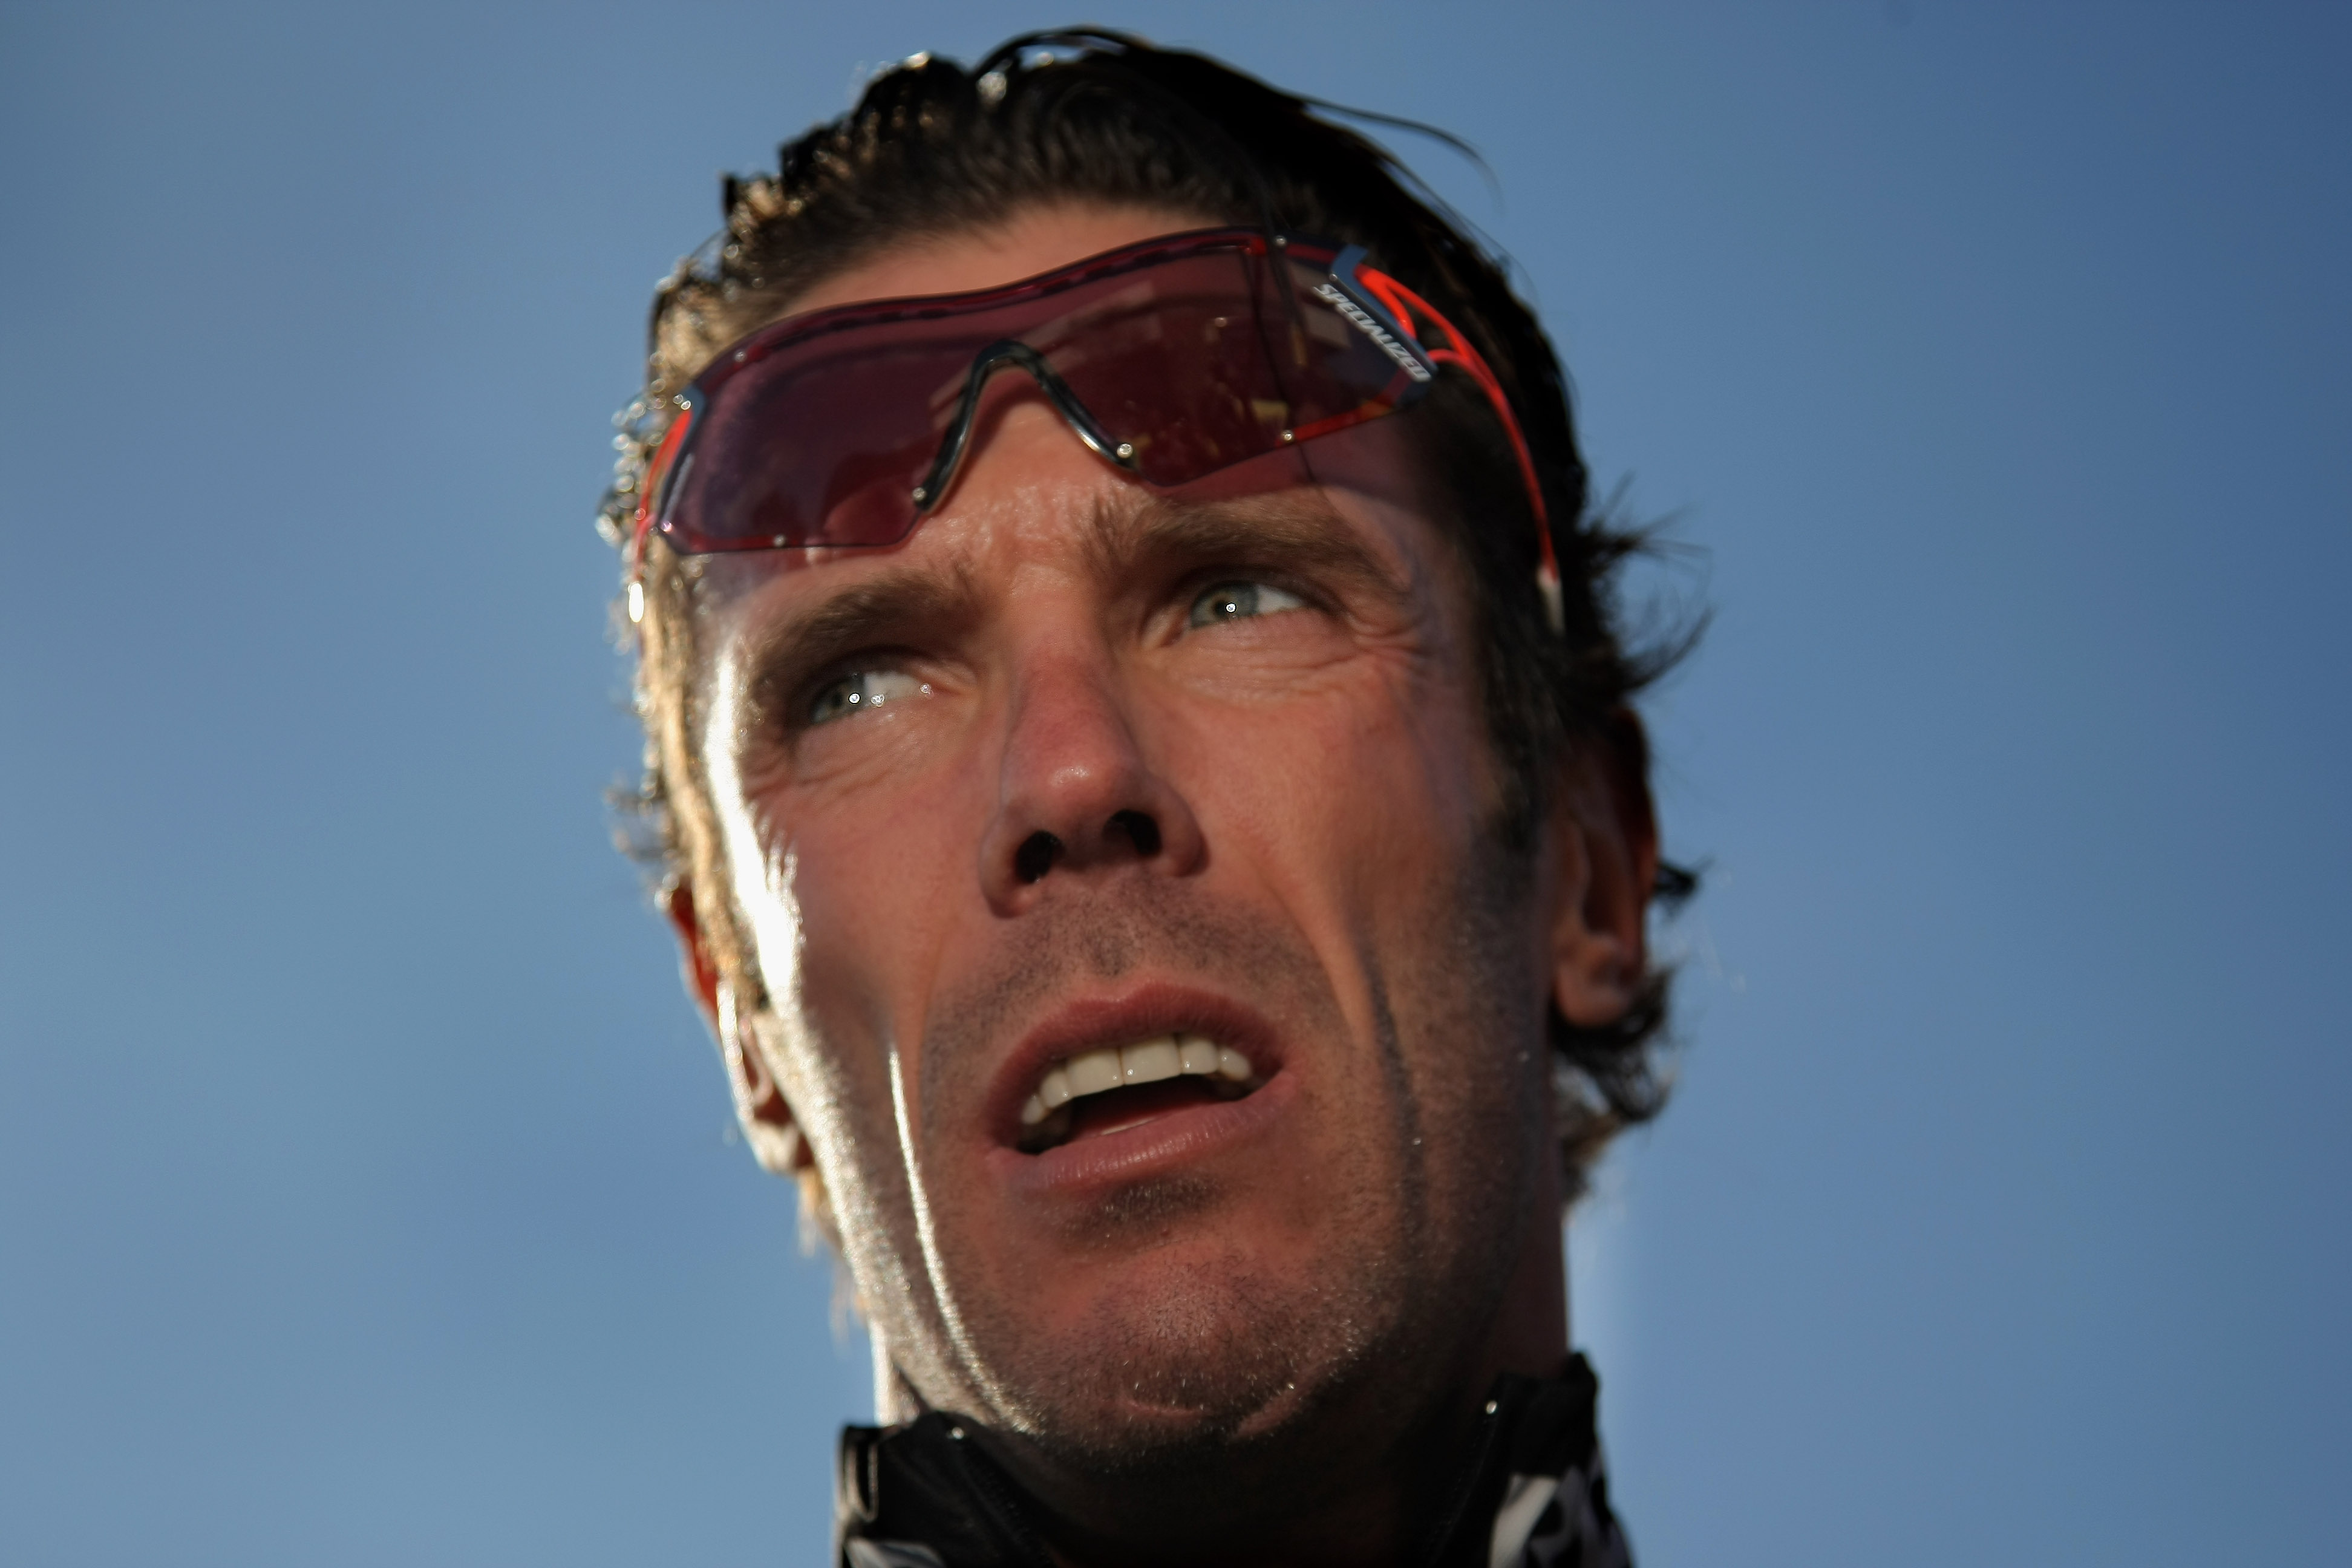 Cipollini: “I was more tied to Inter but I got a little detached from football due to cycling”